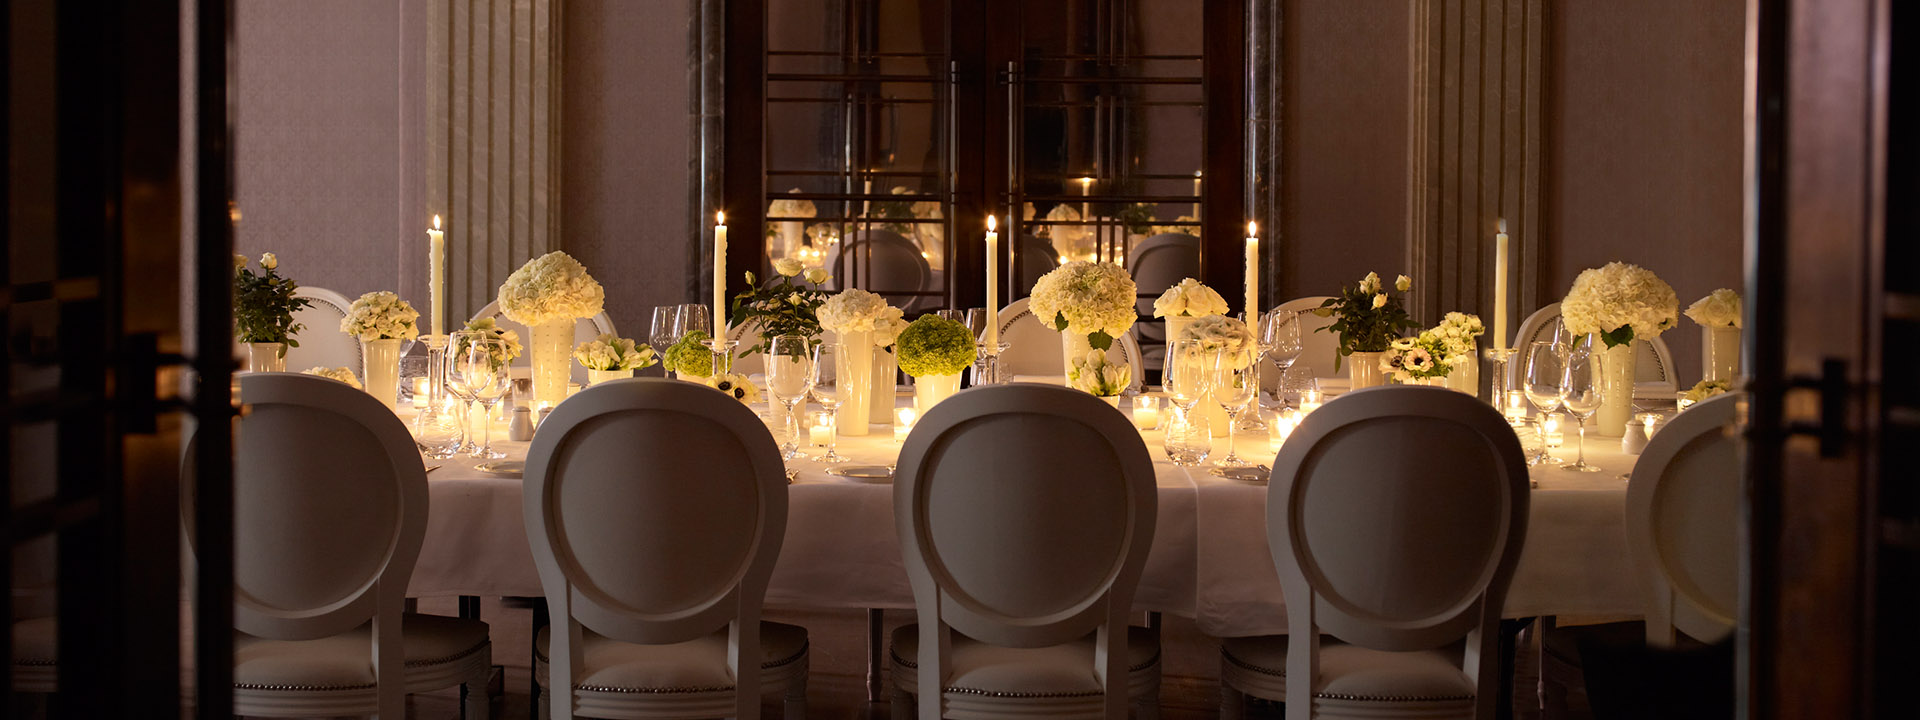 A romantically set table in the Mayfair Room, at The Connaught, decorated with floral arrangements and candles.